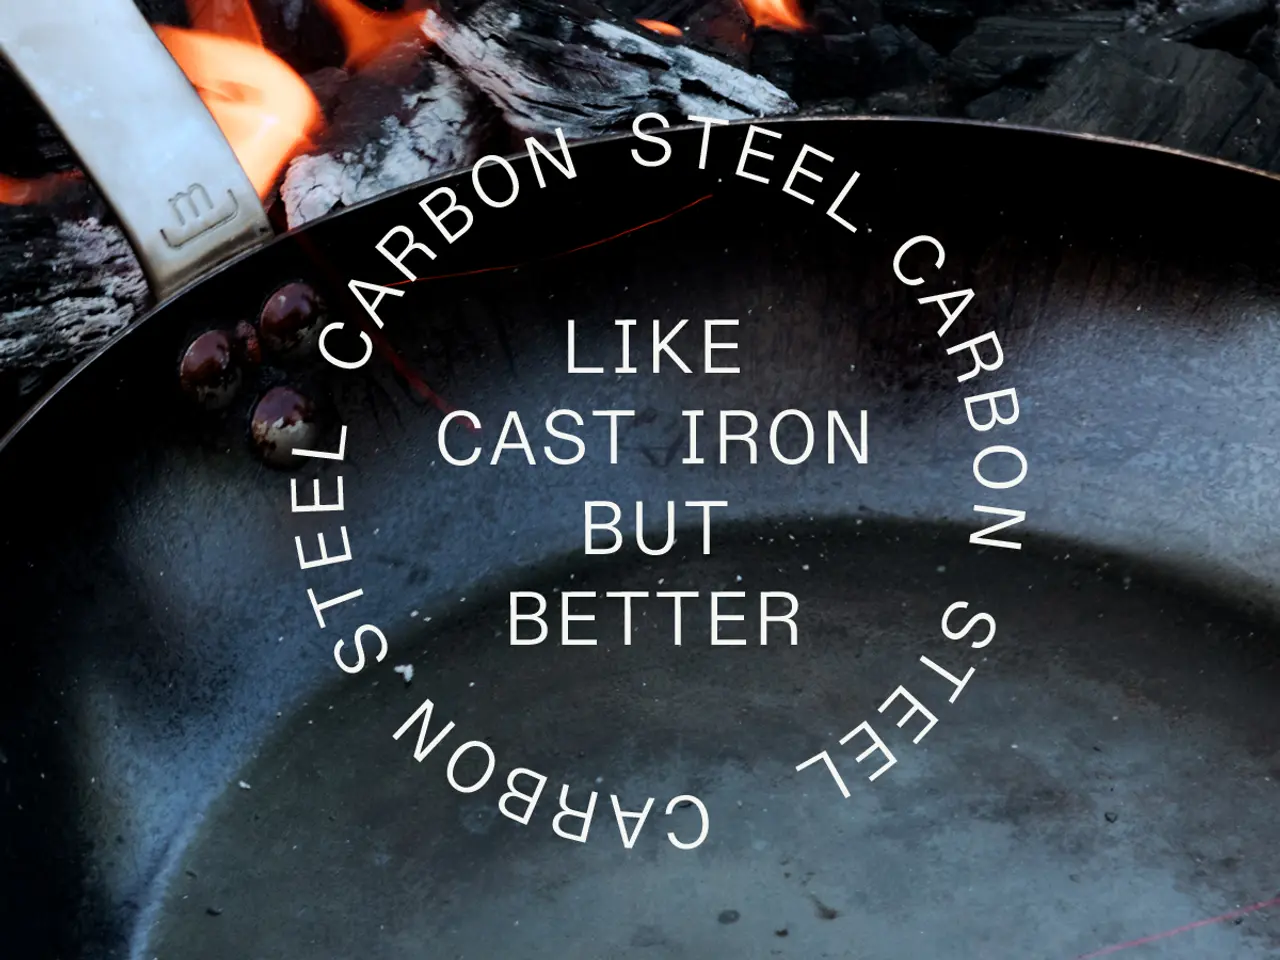 A carbon steel pan with the words "CARBON STEEL LIKE CAST IRON BUT BETTER" etched inside sits over an open flame, with a wooden handle at the edge.